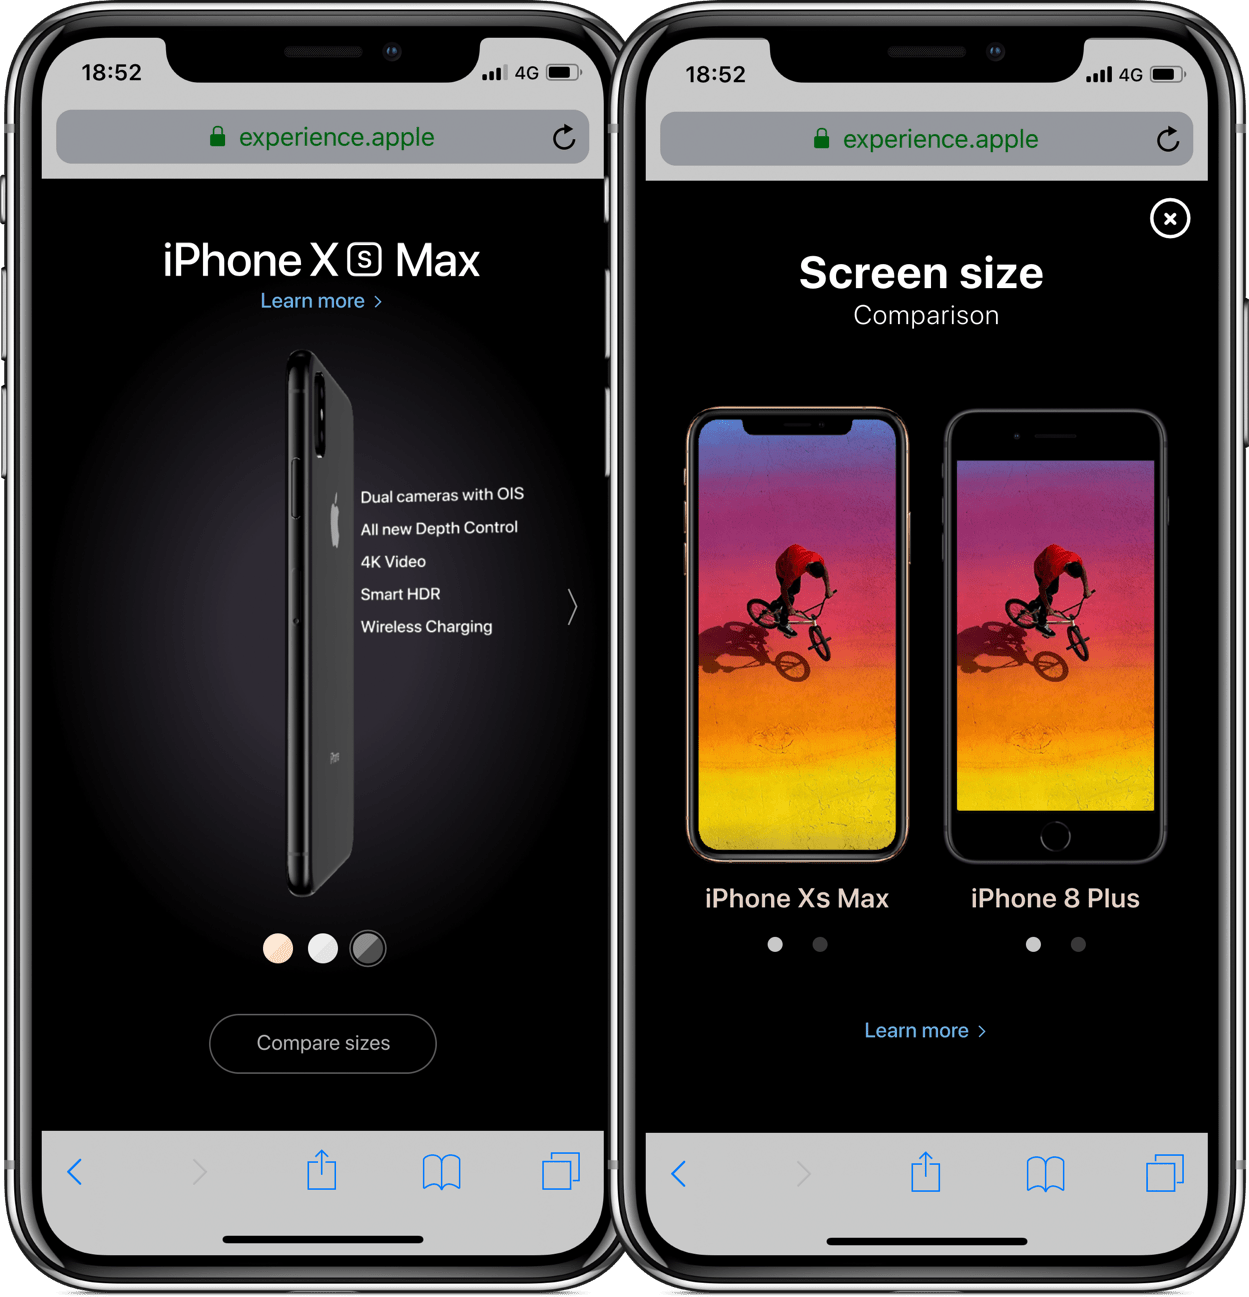 Microsite presenting the new iPhones XS and XS Max